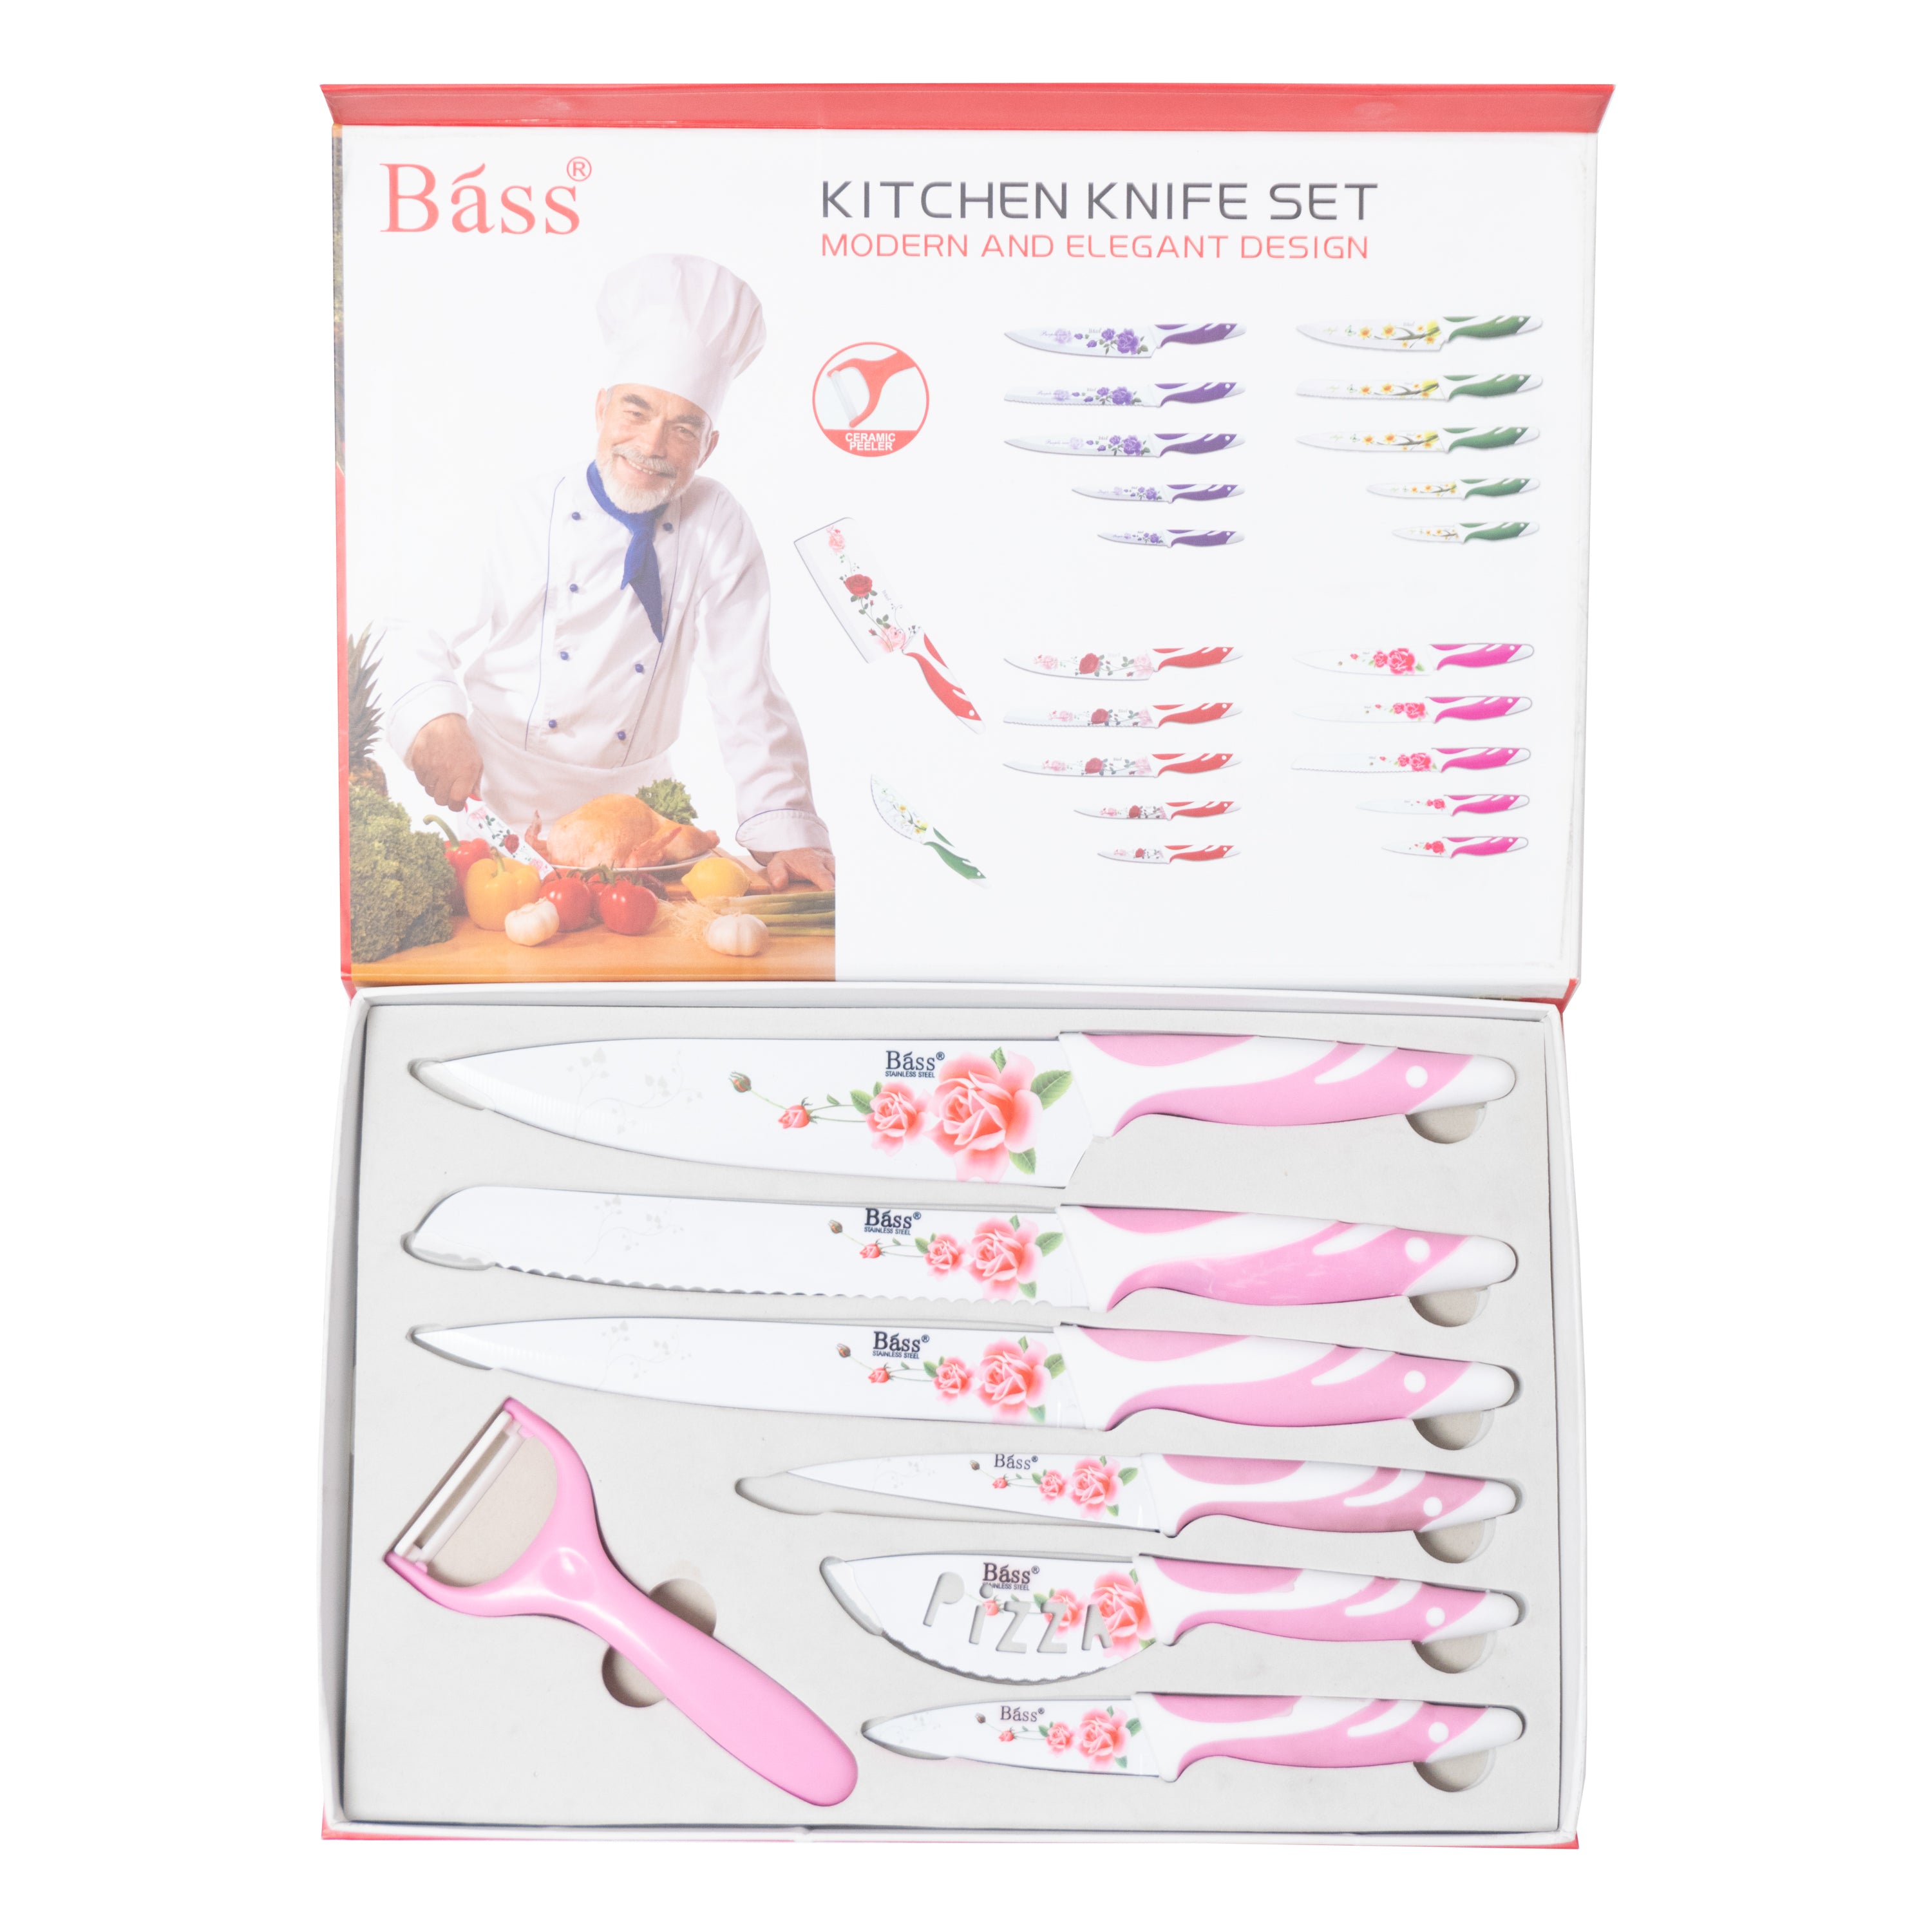 Bass Stainless Steel 6-Piece Knife Set - Essential Culinary Knife Collection